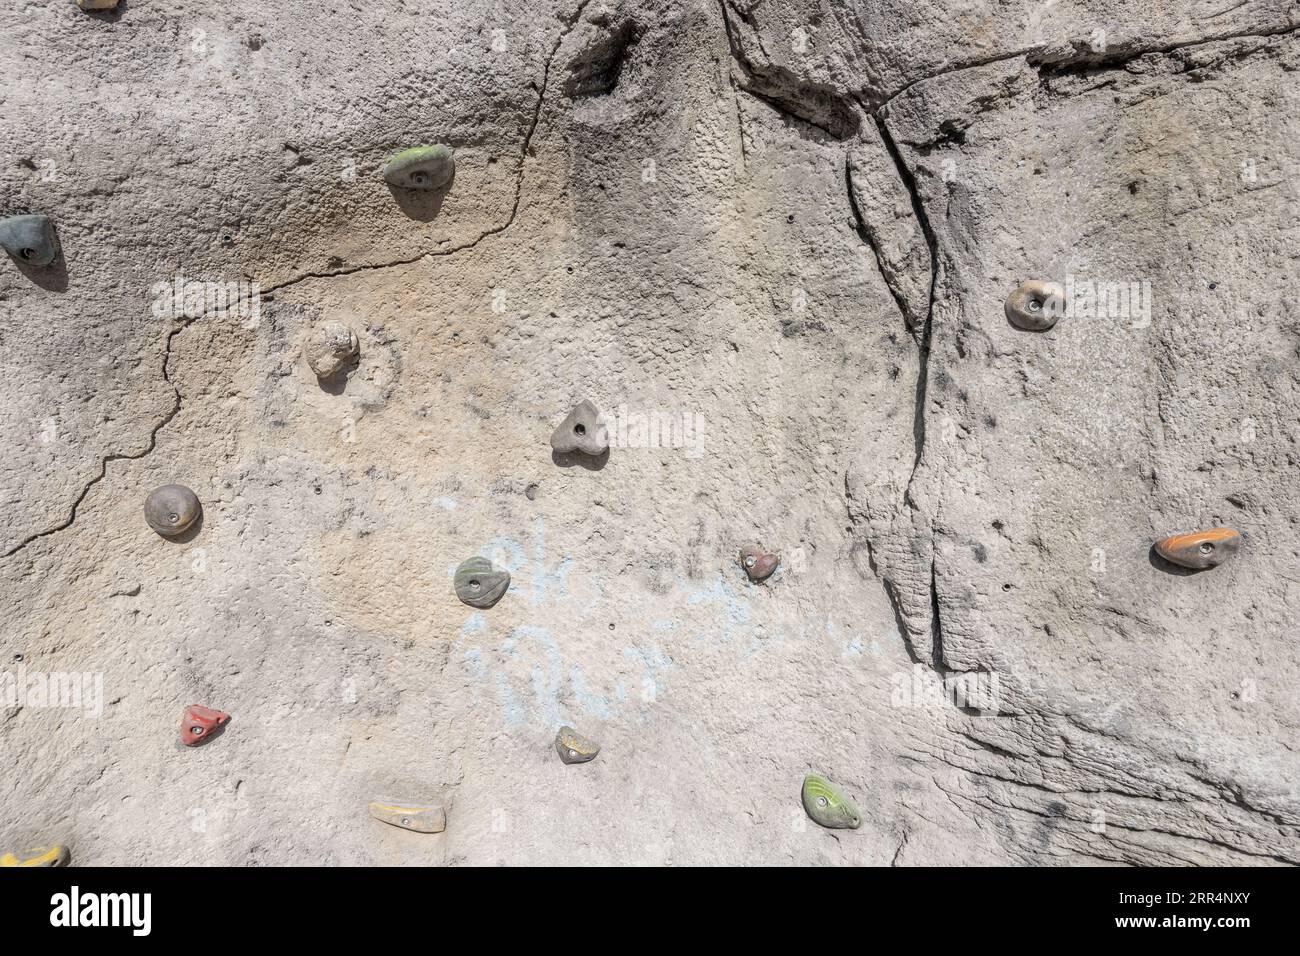 An outside rock with climbing holds for training. Stock Photo